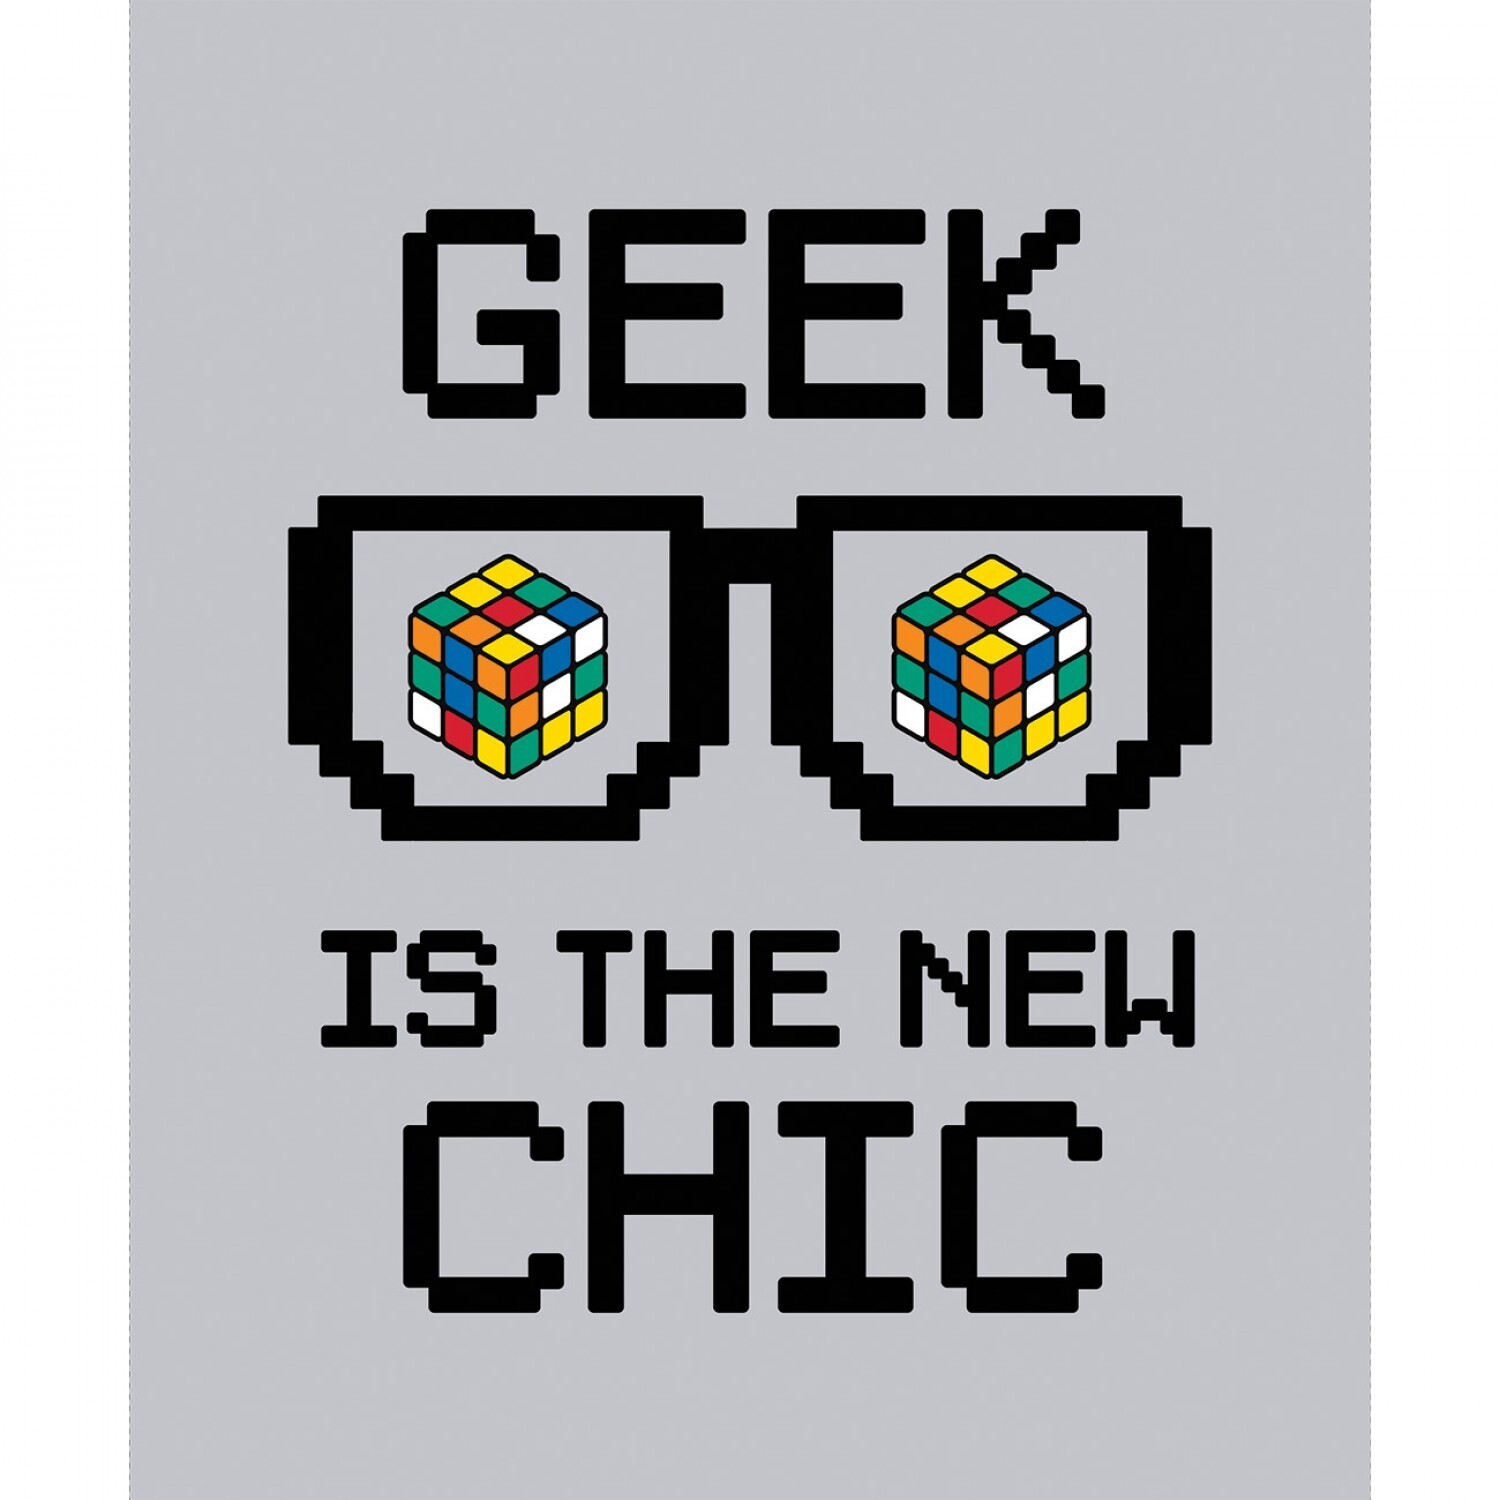 Geek is the New Chic - Cotton - Panel